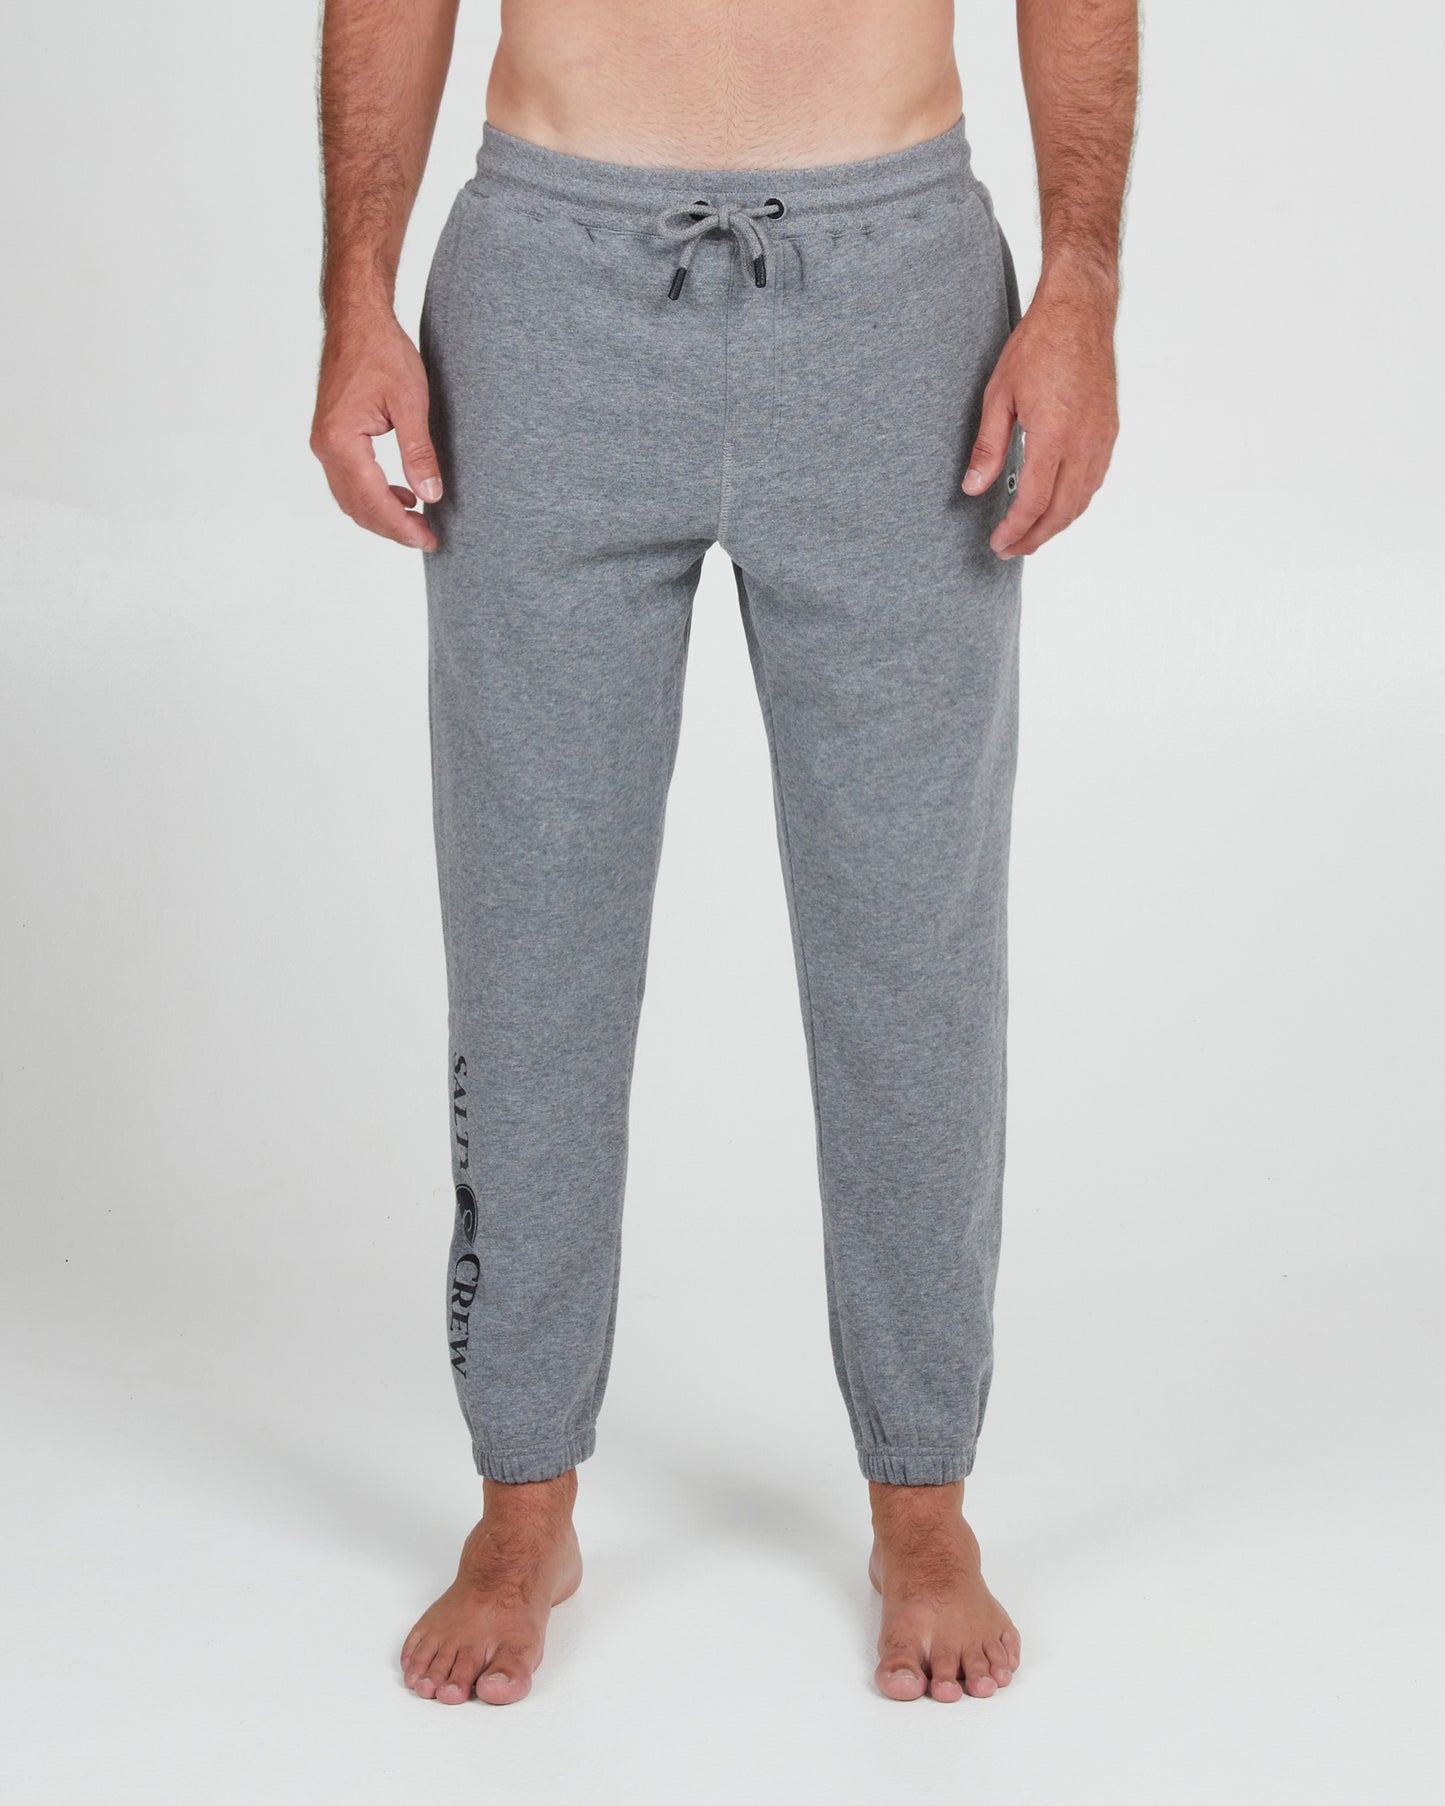 On body front of the Dockside Grey/Heather Sweatpant